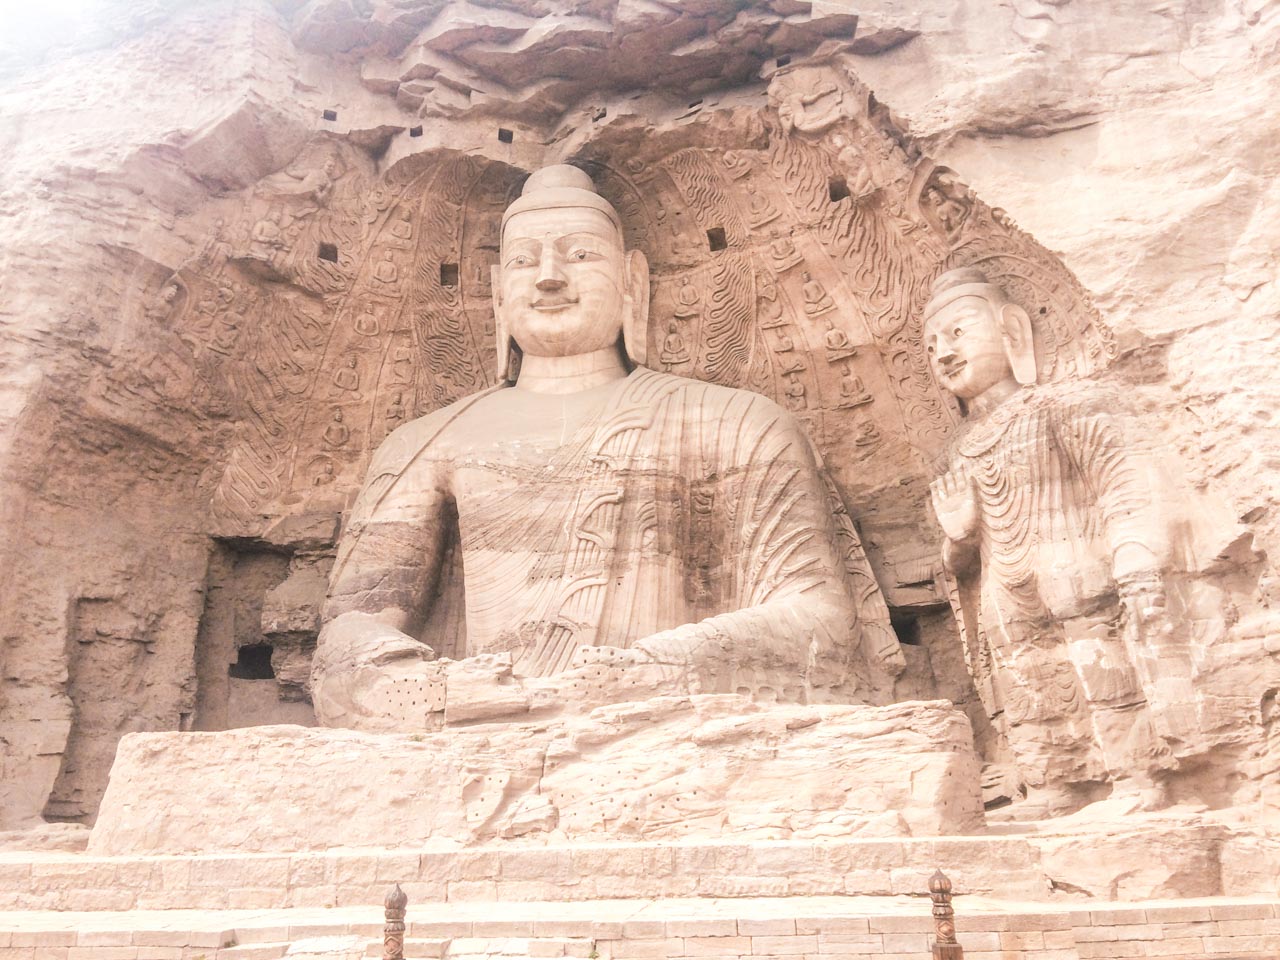 Buddha statues carved into the cliffside at the Yungang Grottoes in Datong, Shanxi